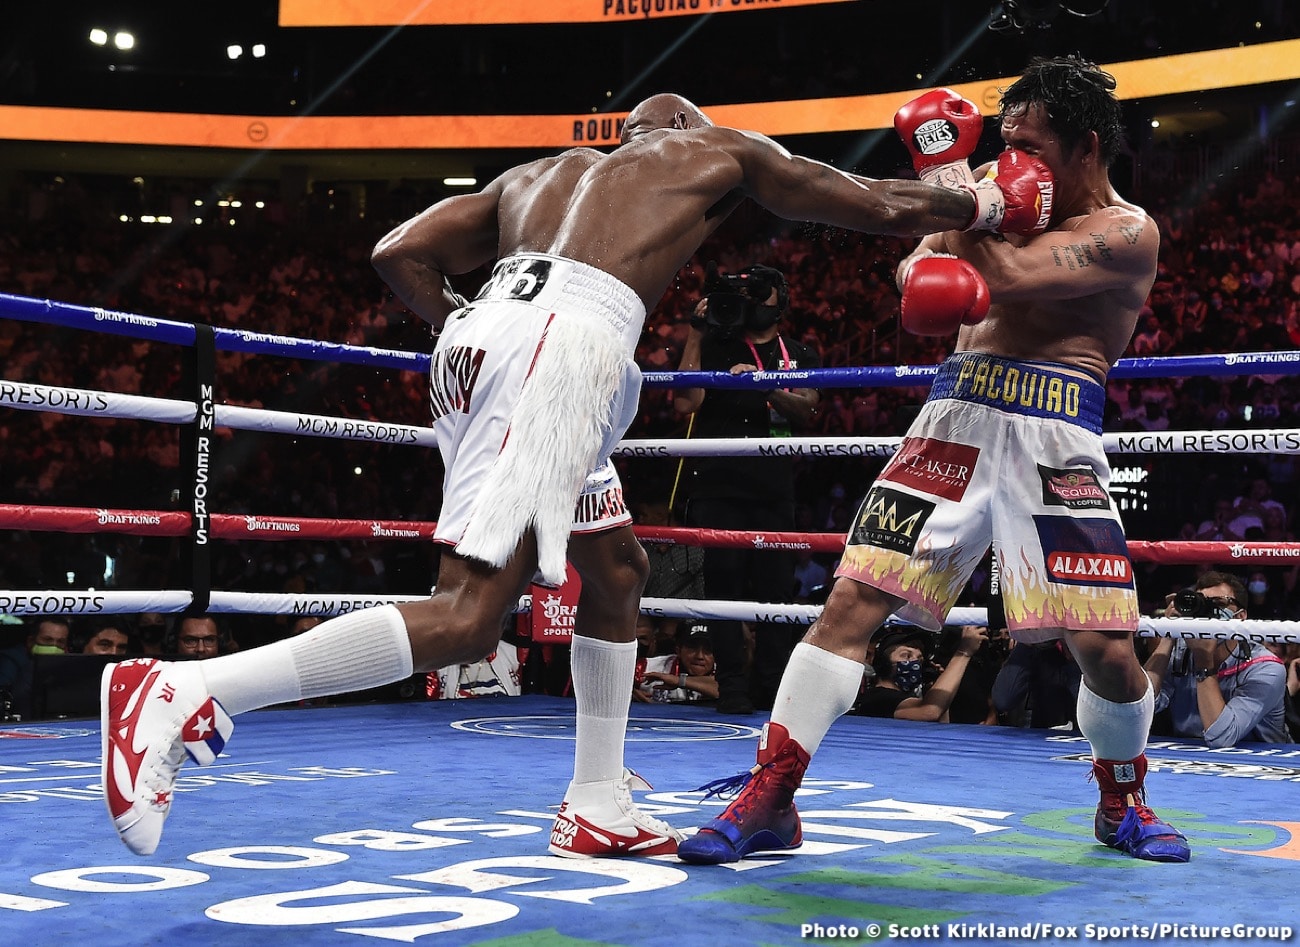 Manny Pacquiao, Mikey Garcia, Yordenis Ugas boxing photo and news image